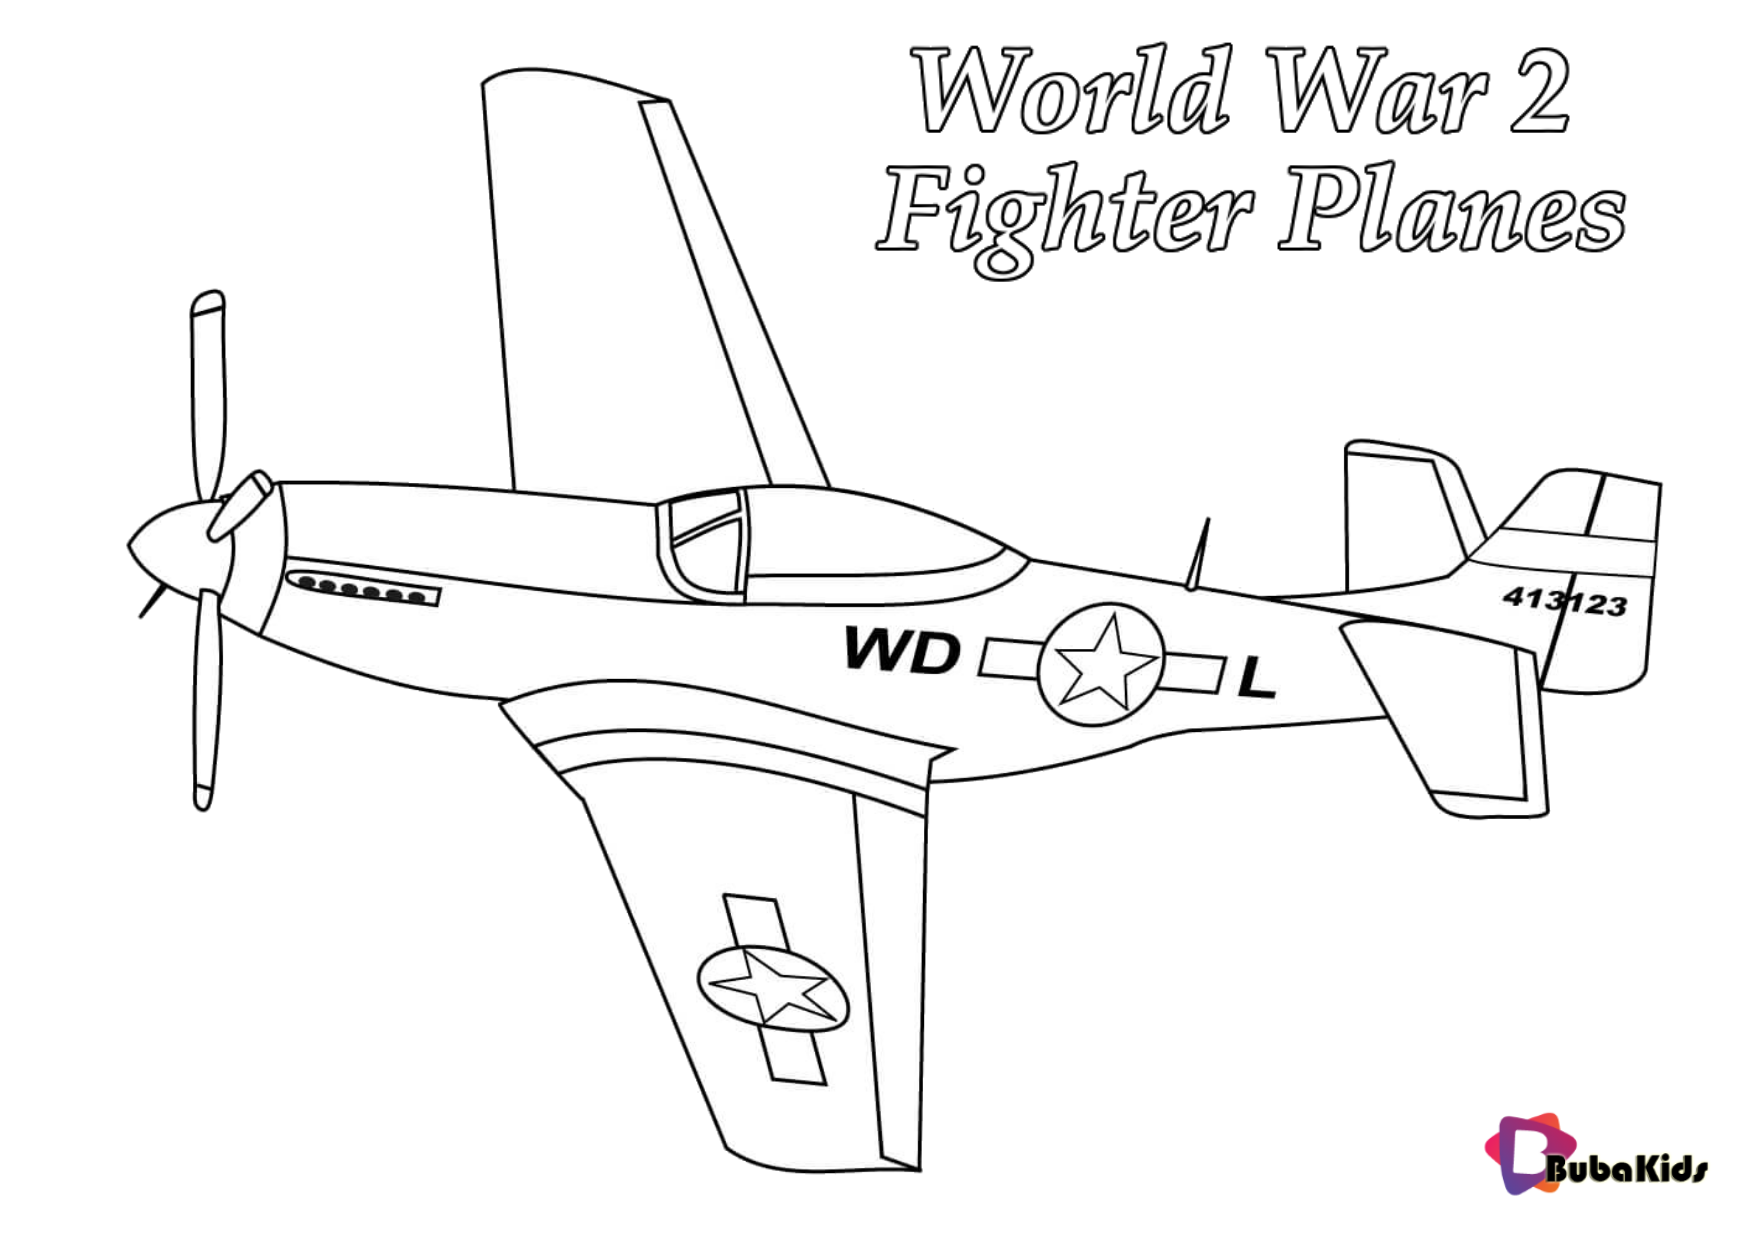 P-51 Mustang world war 2 fighter planes coloring pages Wallpaper